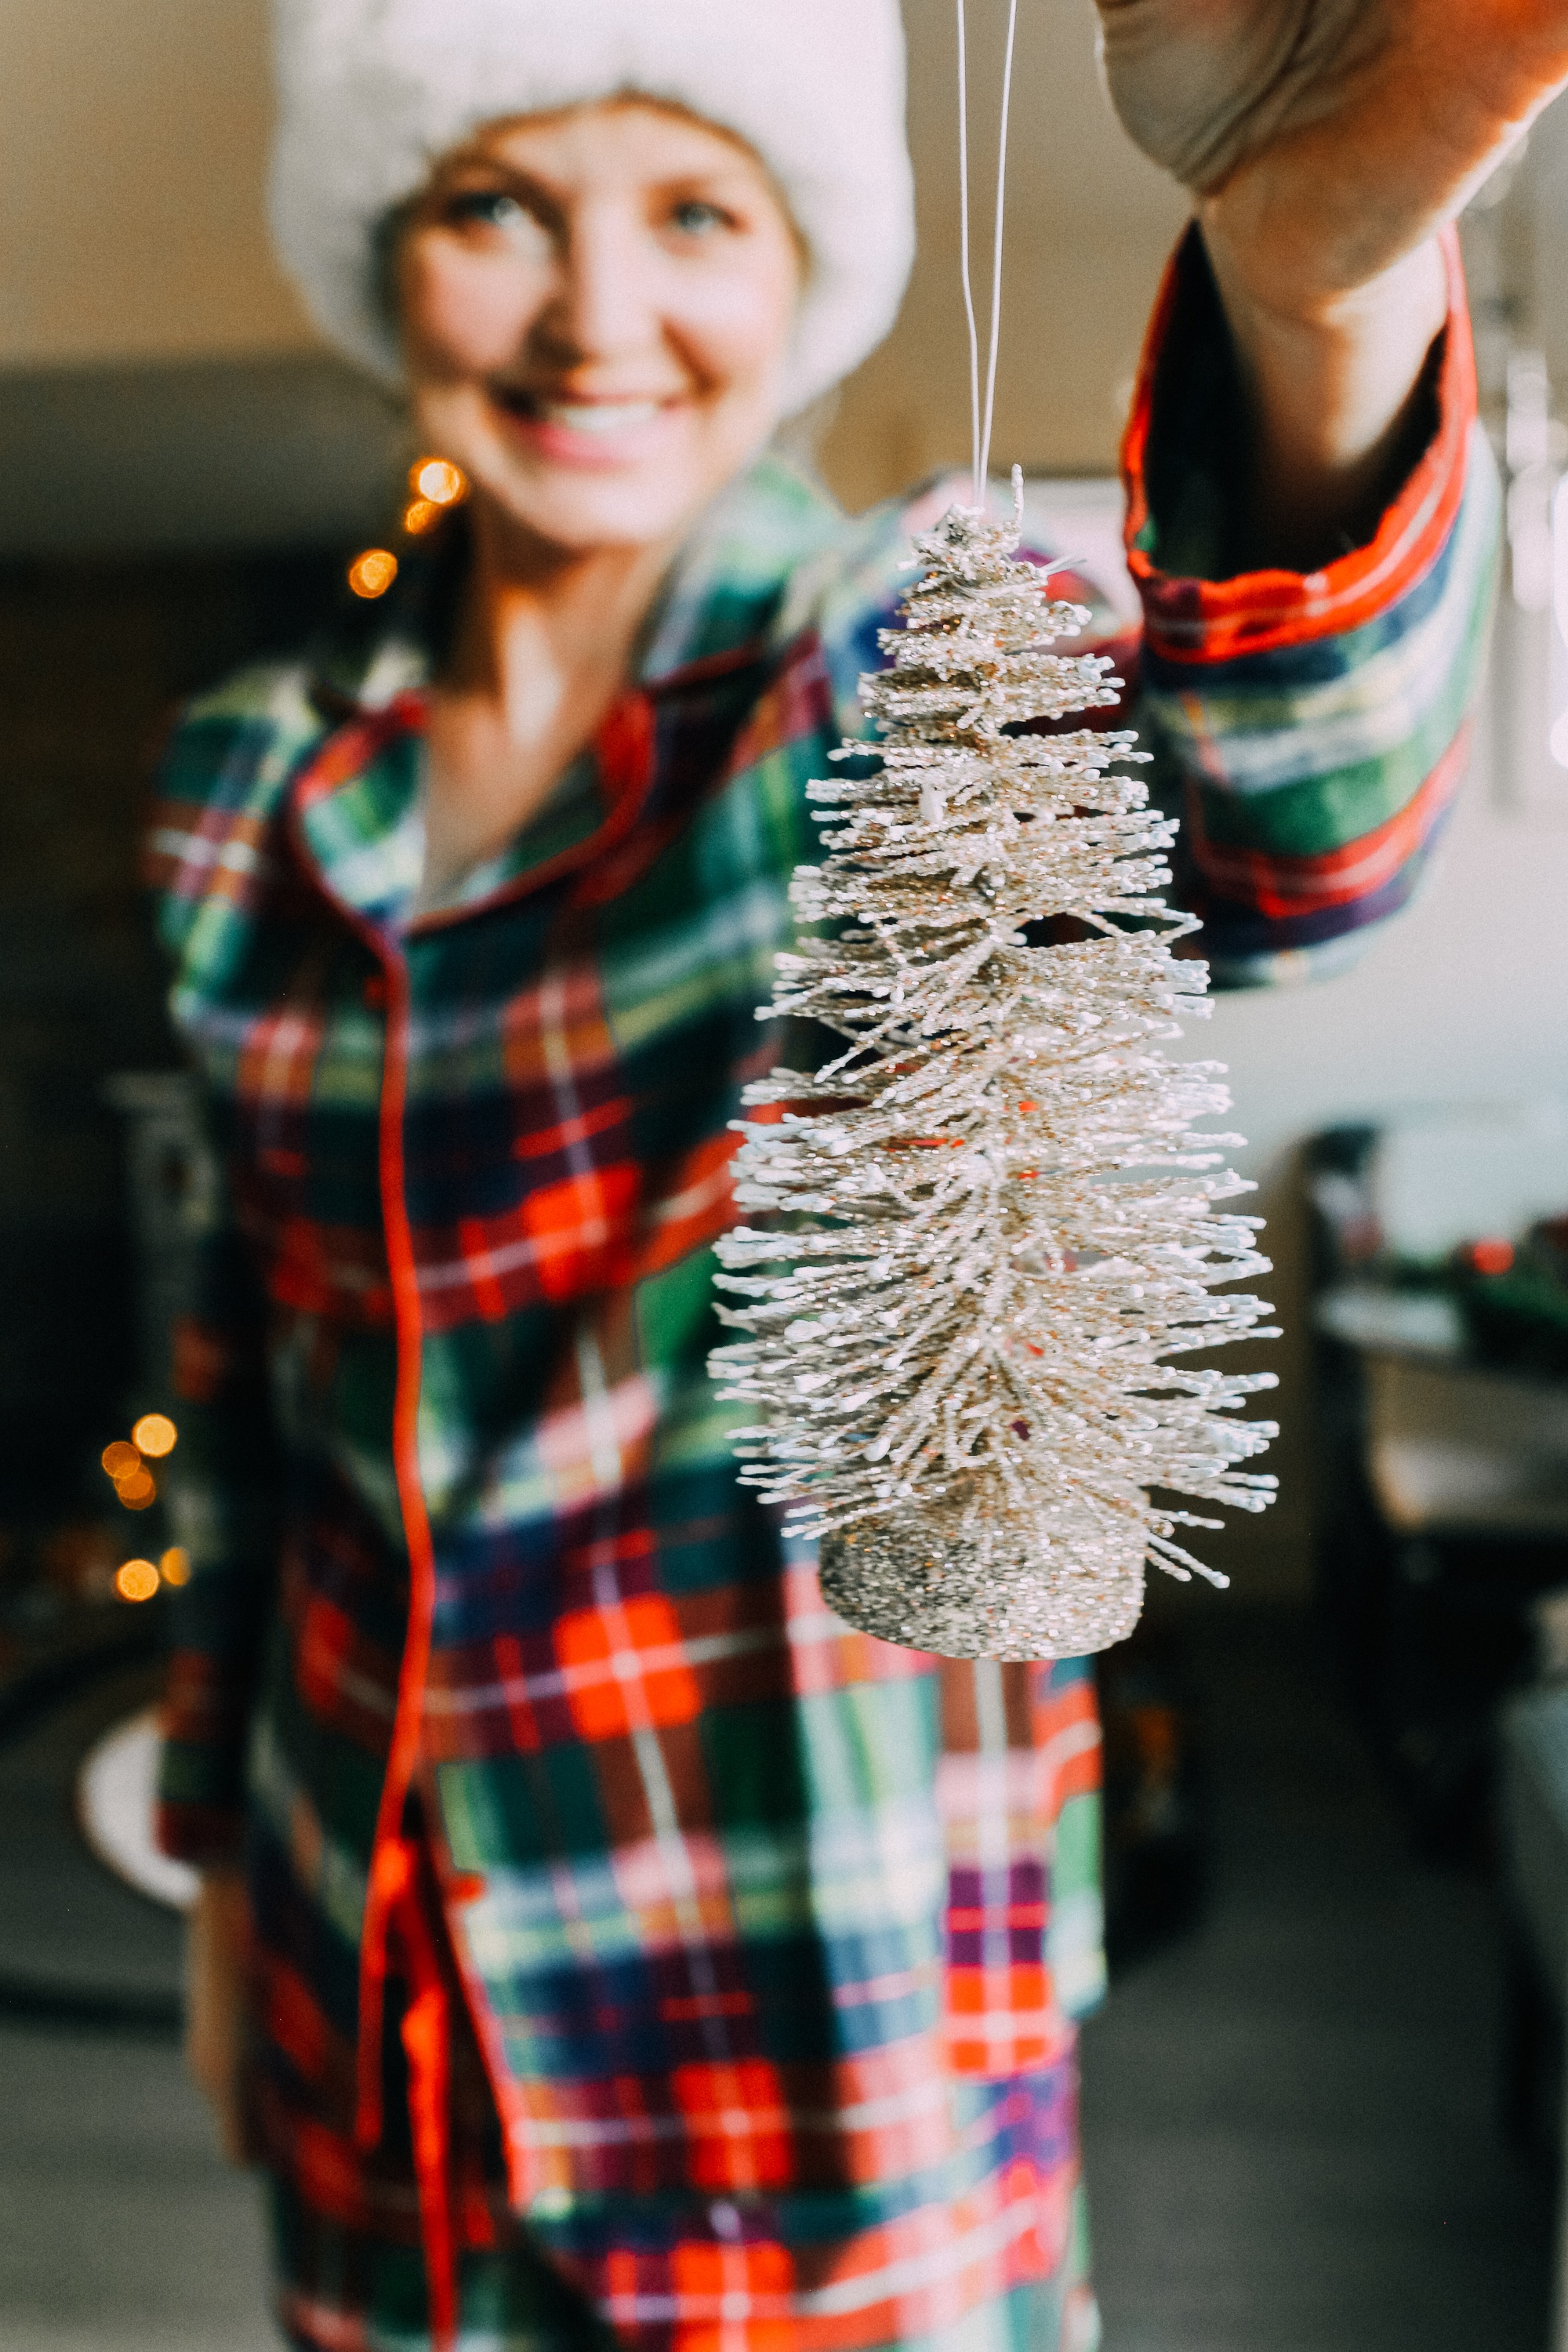 How to make holiday decorating easier, Fashion blogger Erin Busbee of BusbeeStyle.com sharing how to make the holidays more stress free wearing plaid pajamas shorts and top by Jockey and a Santa hat by her pre-lit tree in Telluride, CO